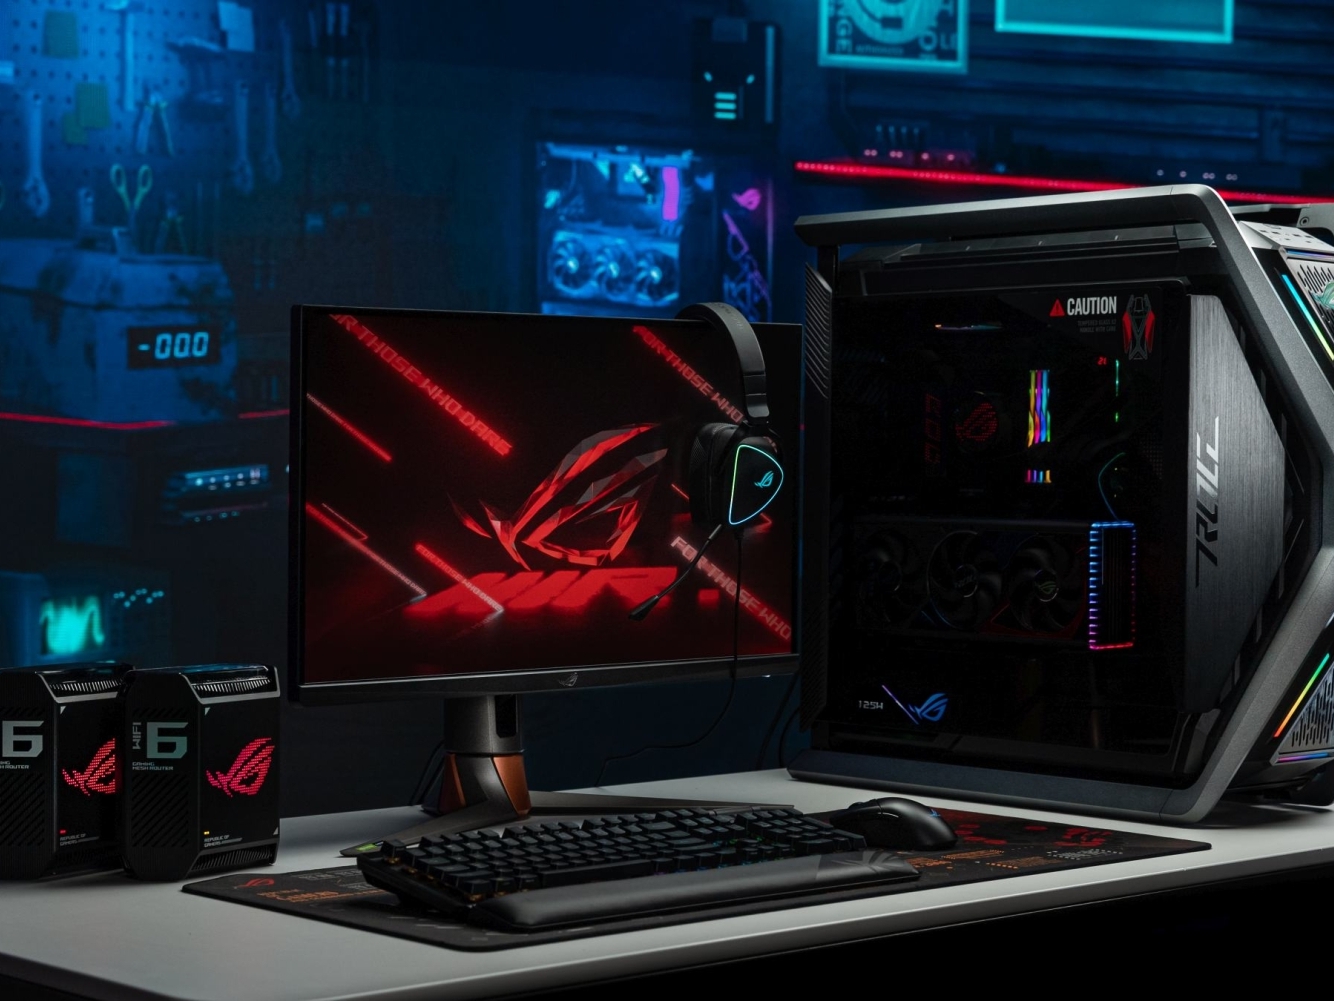 The ASUS ROG Hyperion GR701 chassis looks like it came from the future 